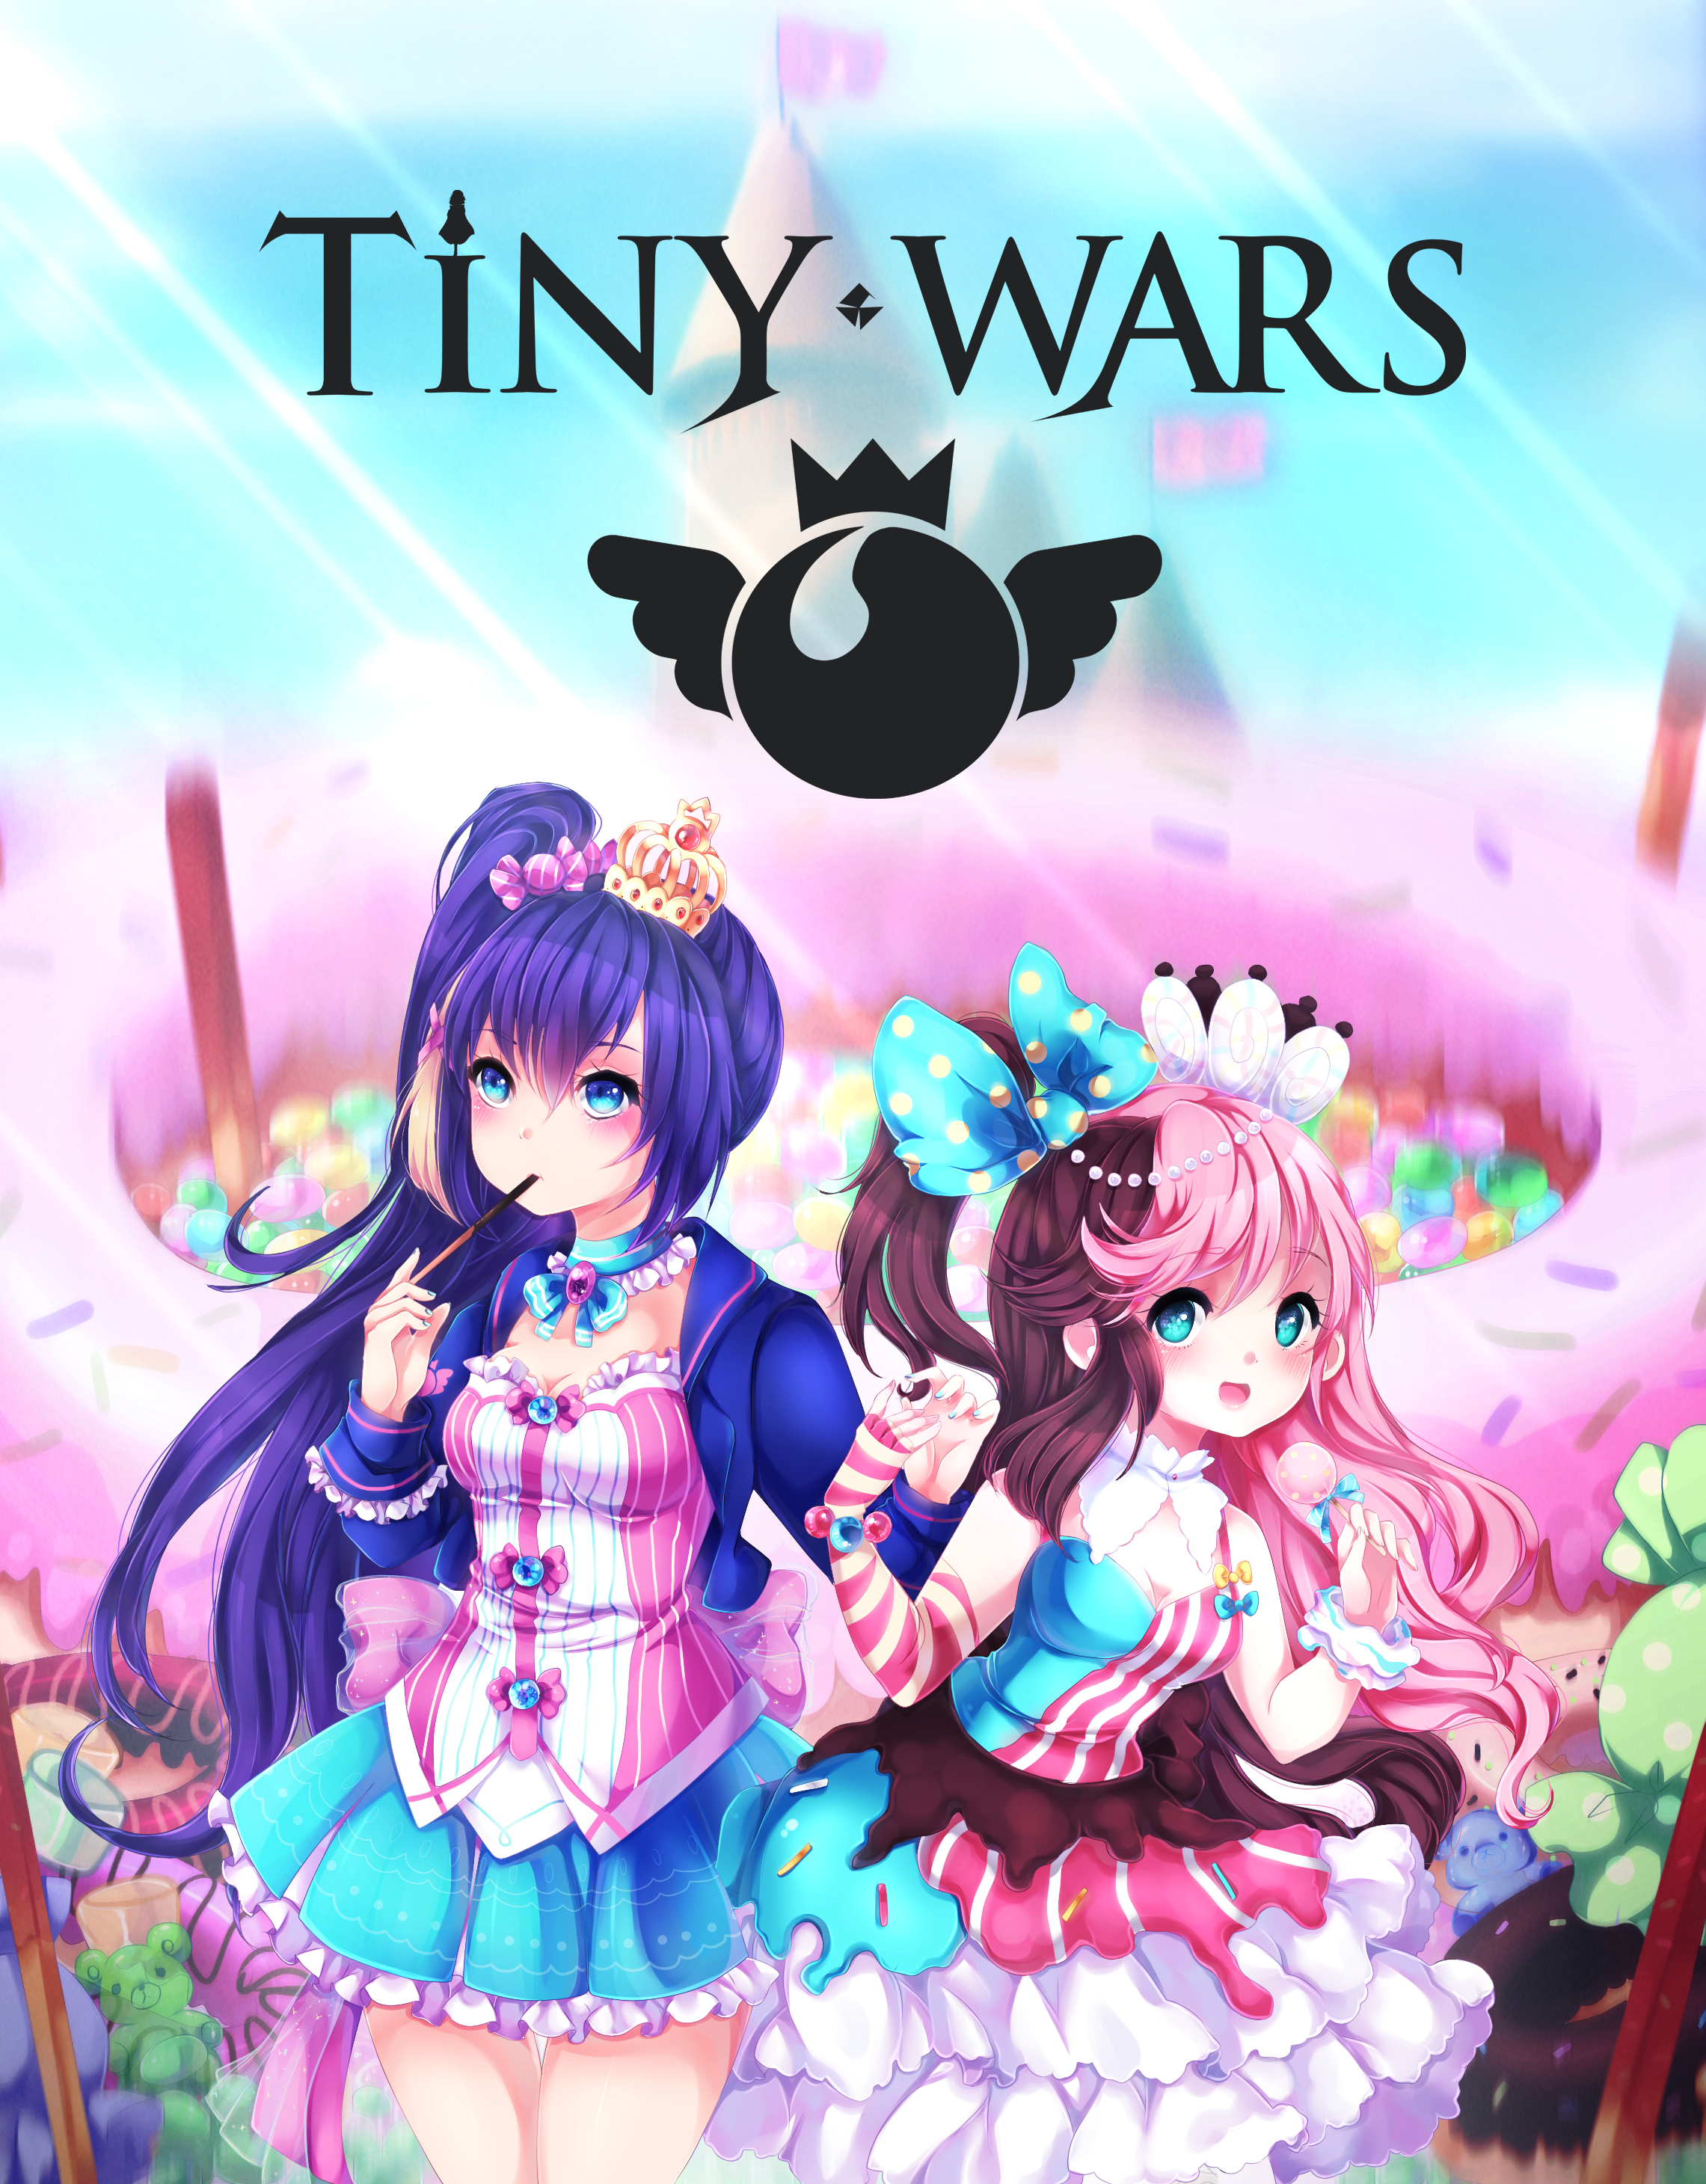 Candy Sisters Anime Girls by TinyWars